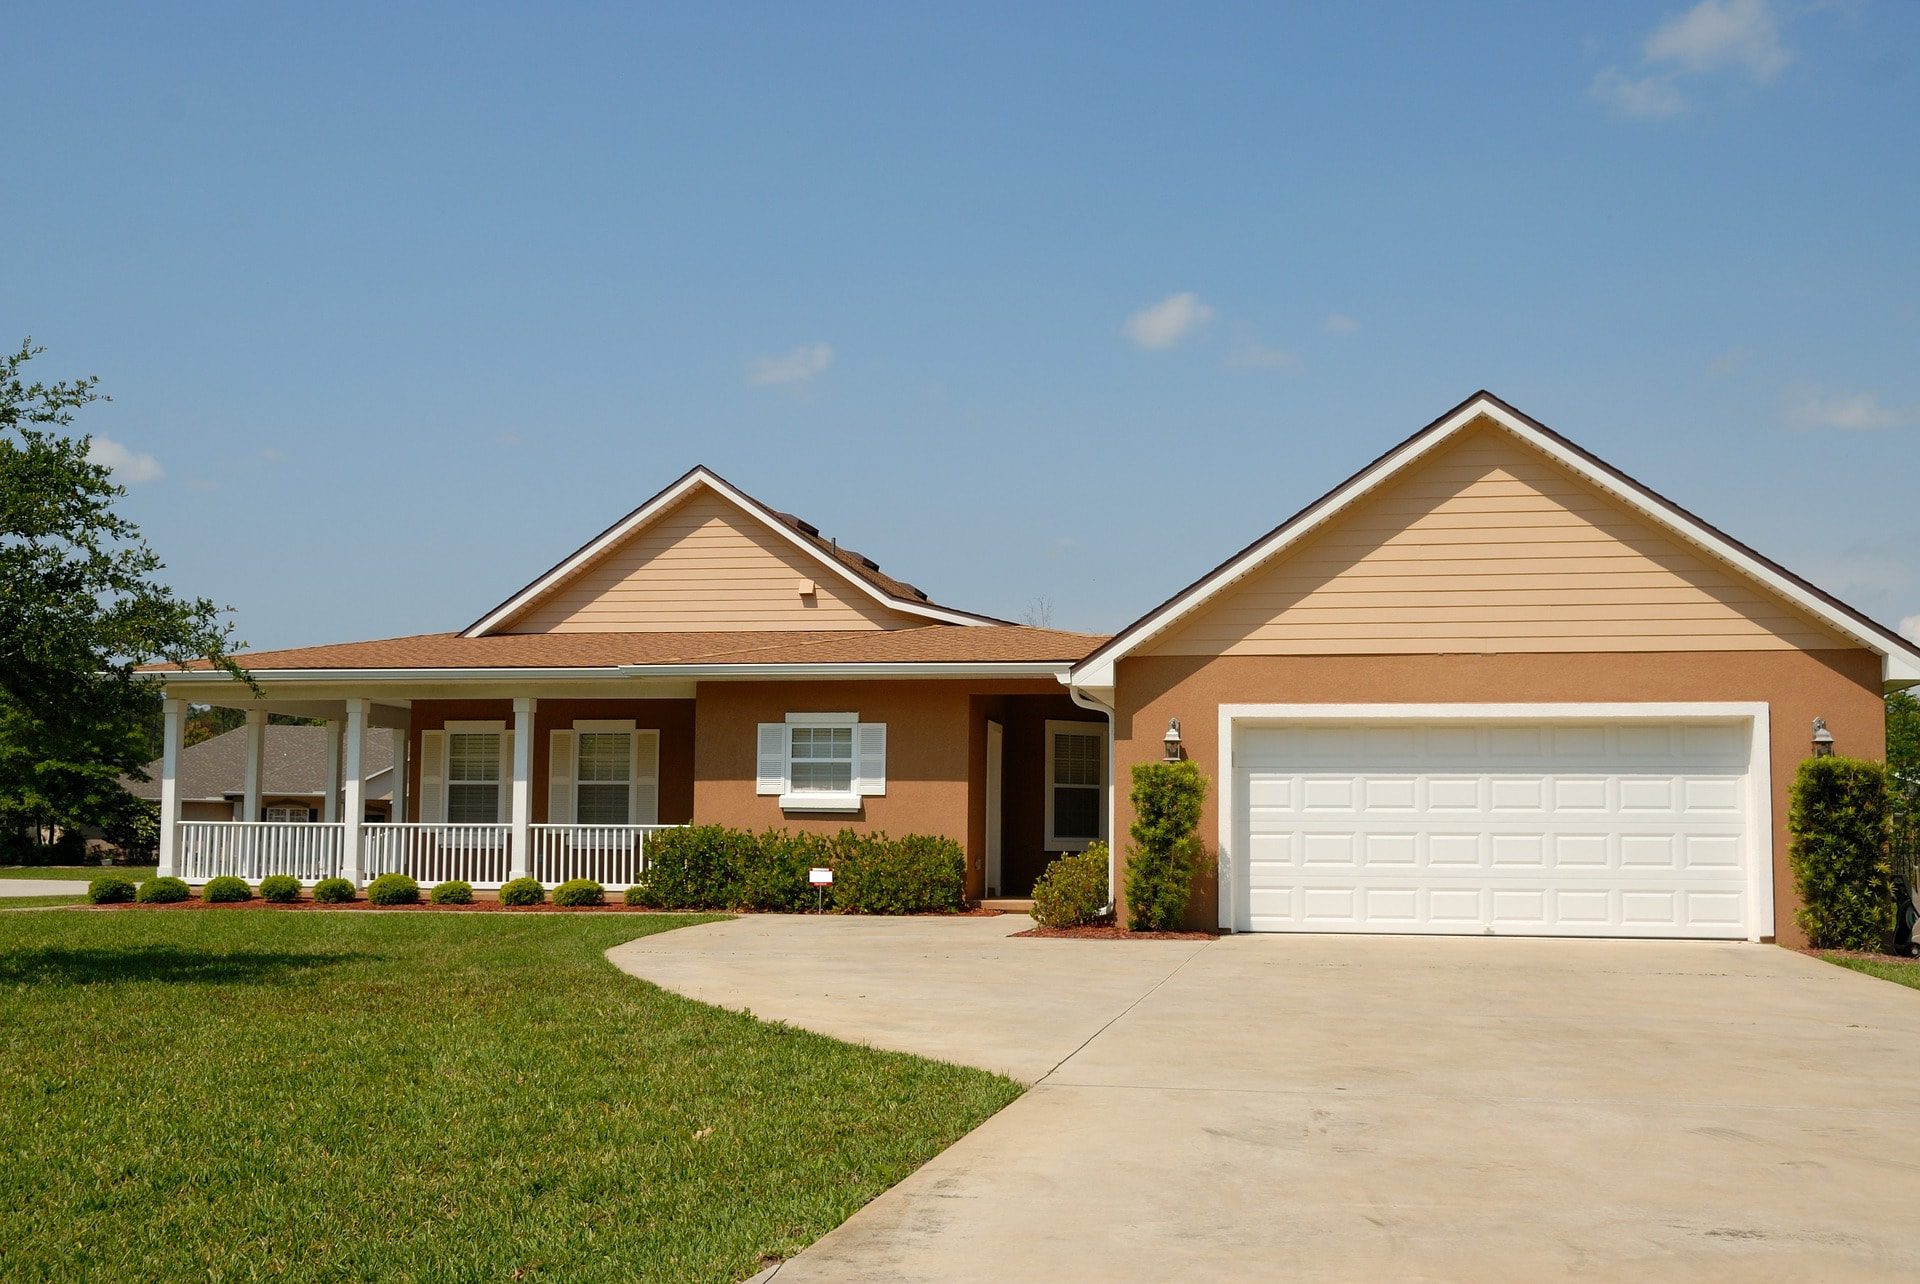 An image of a large tan house, like a rental home you might find when you rent with Florida Management & Consulting Group